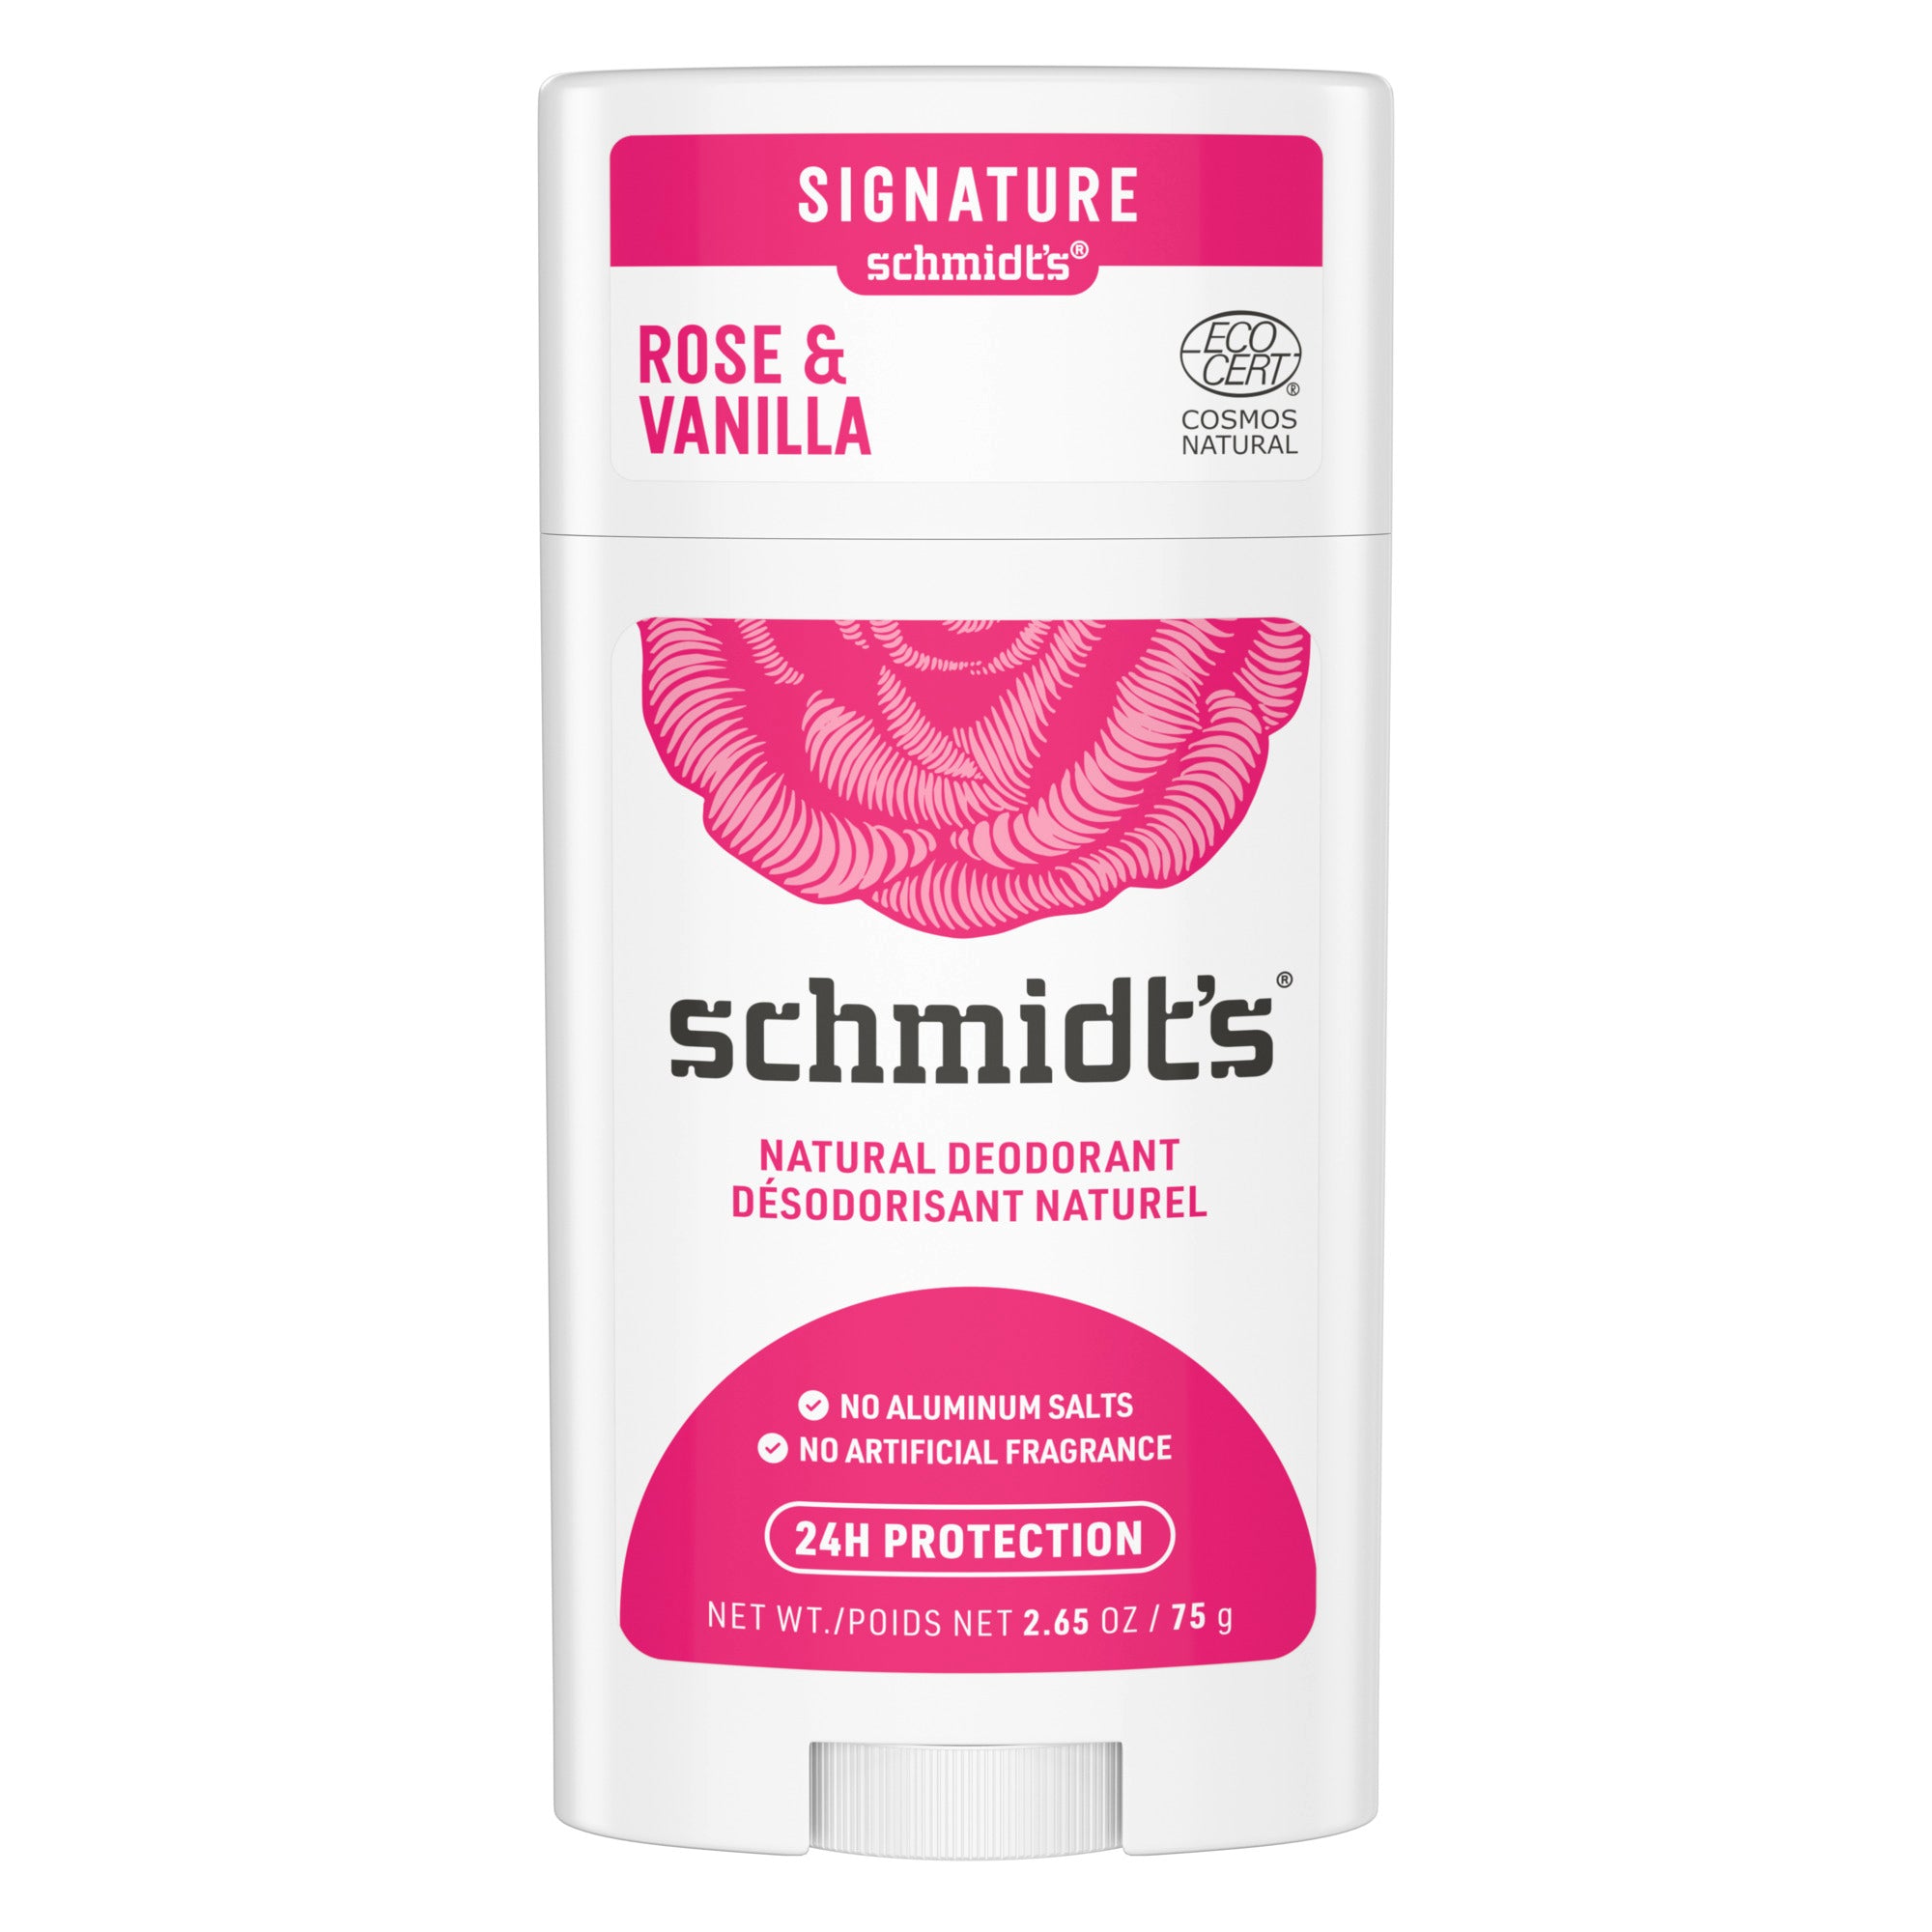 Showing the front angle view of the Schmidt's Rose and Vanilla Natural Deodorant 75g pink and white packaging.